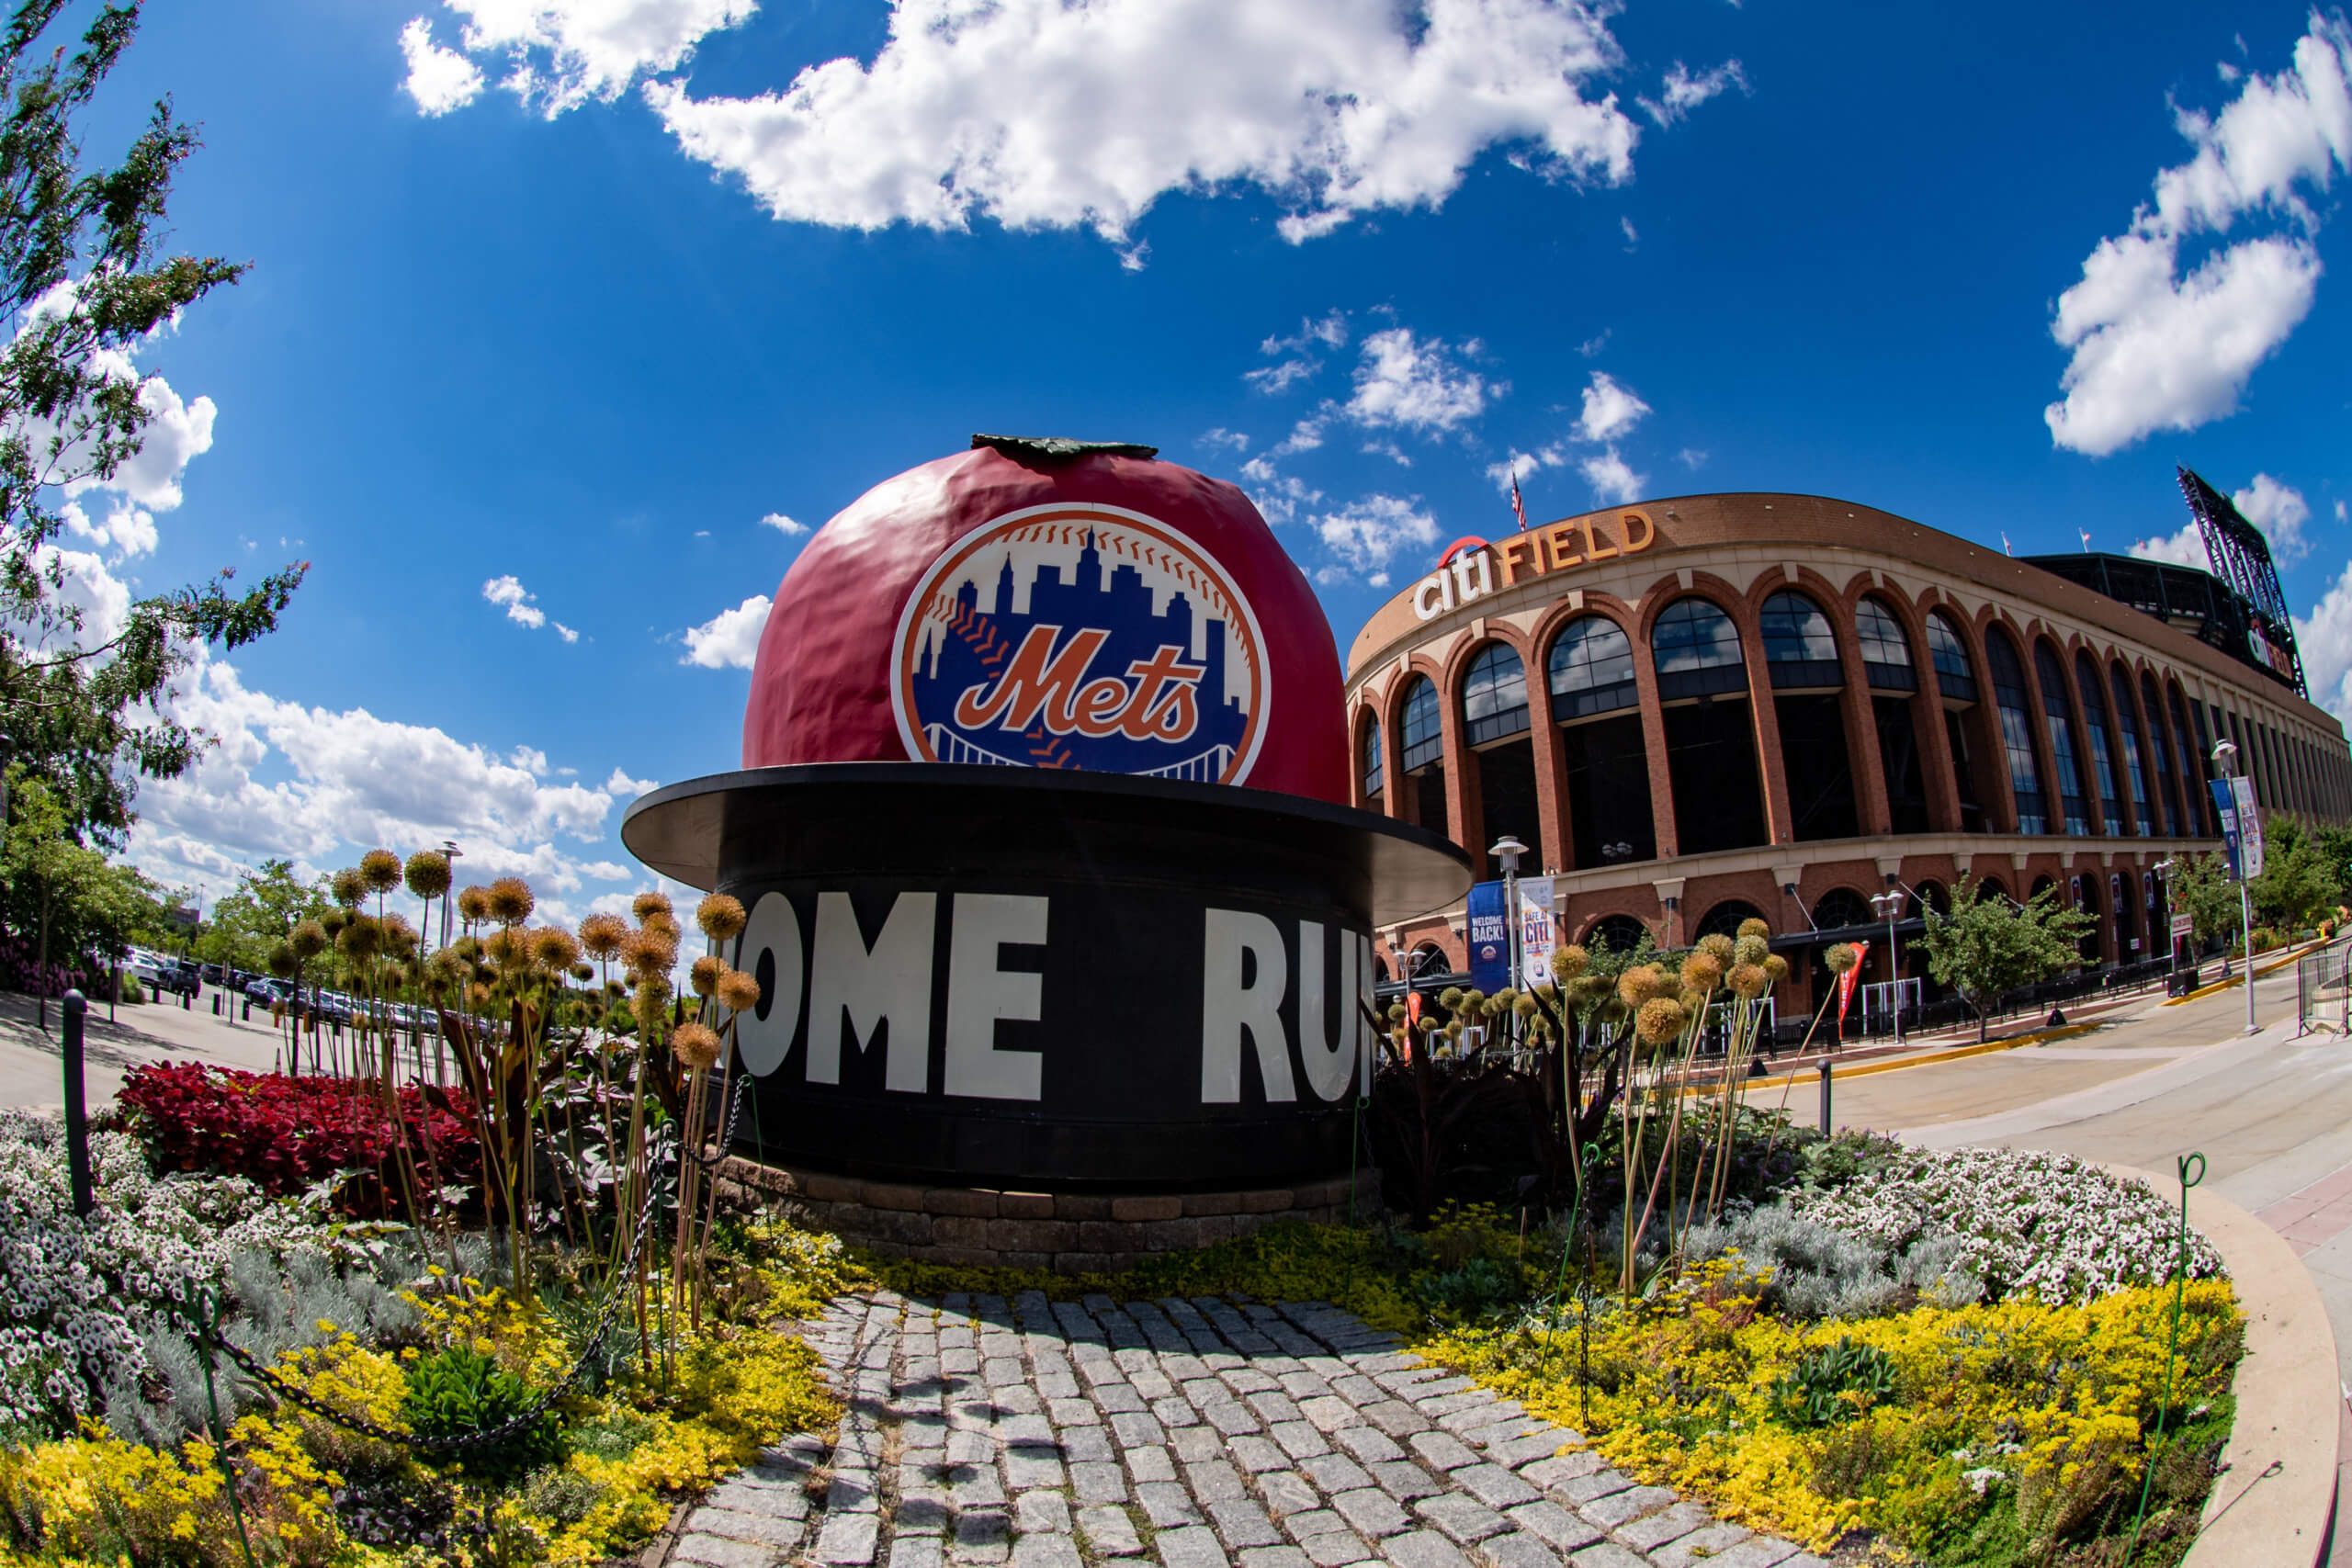 Petition · Petitioning for New York Mets to Bring Back the